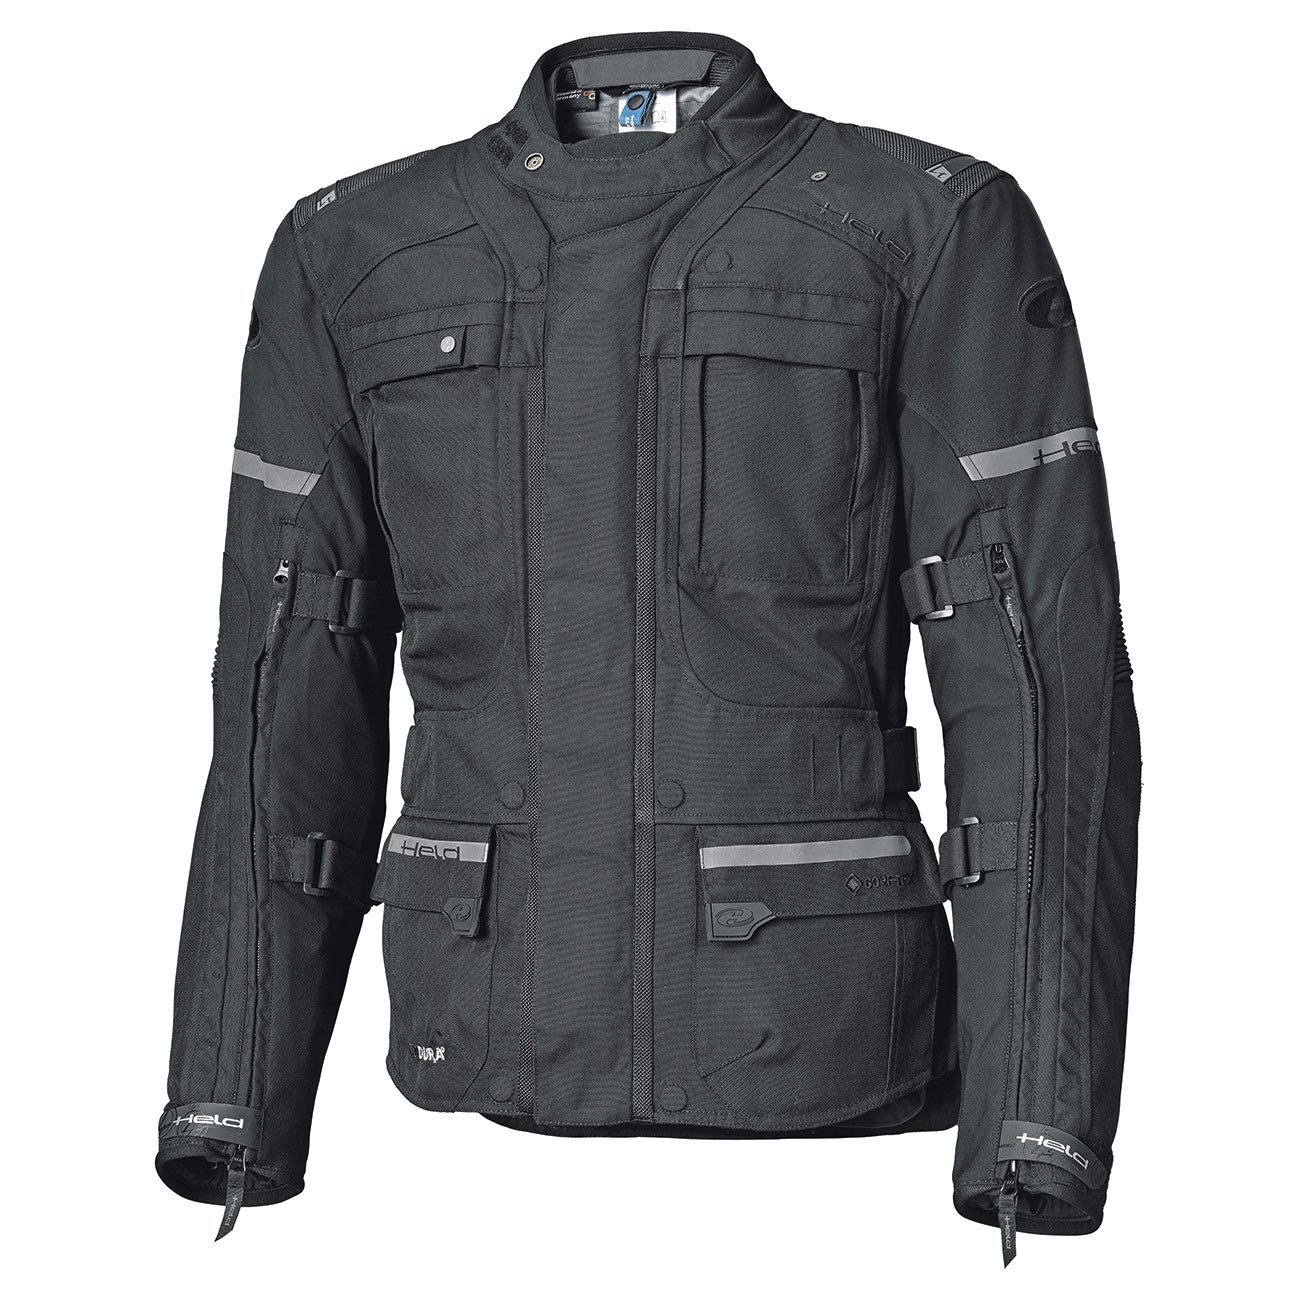 Image of Held Carese Evo Gore-Tex Touring Jacket Black Size L ID 4049462891159